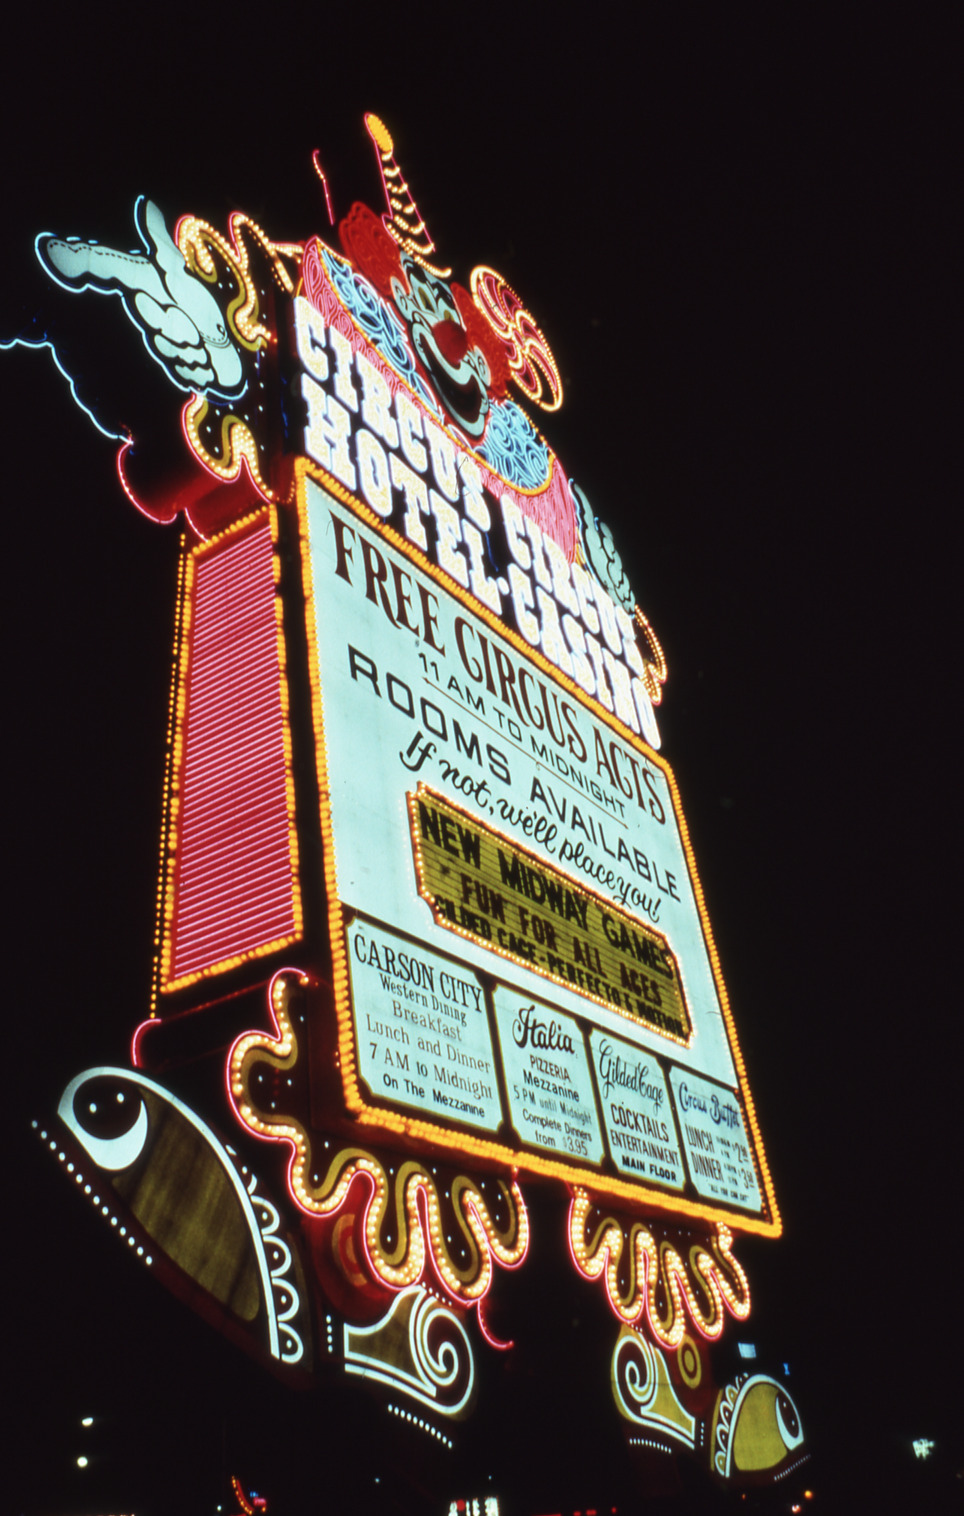 Circus Circus monument, roof mounted, and wall signs, Las Vegas, Nevada: photographic print